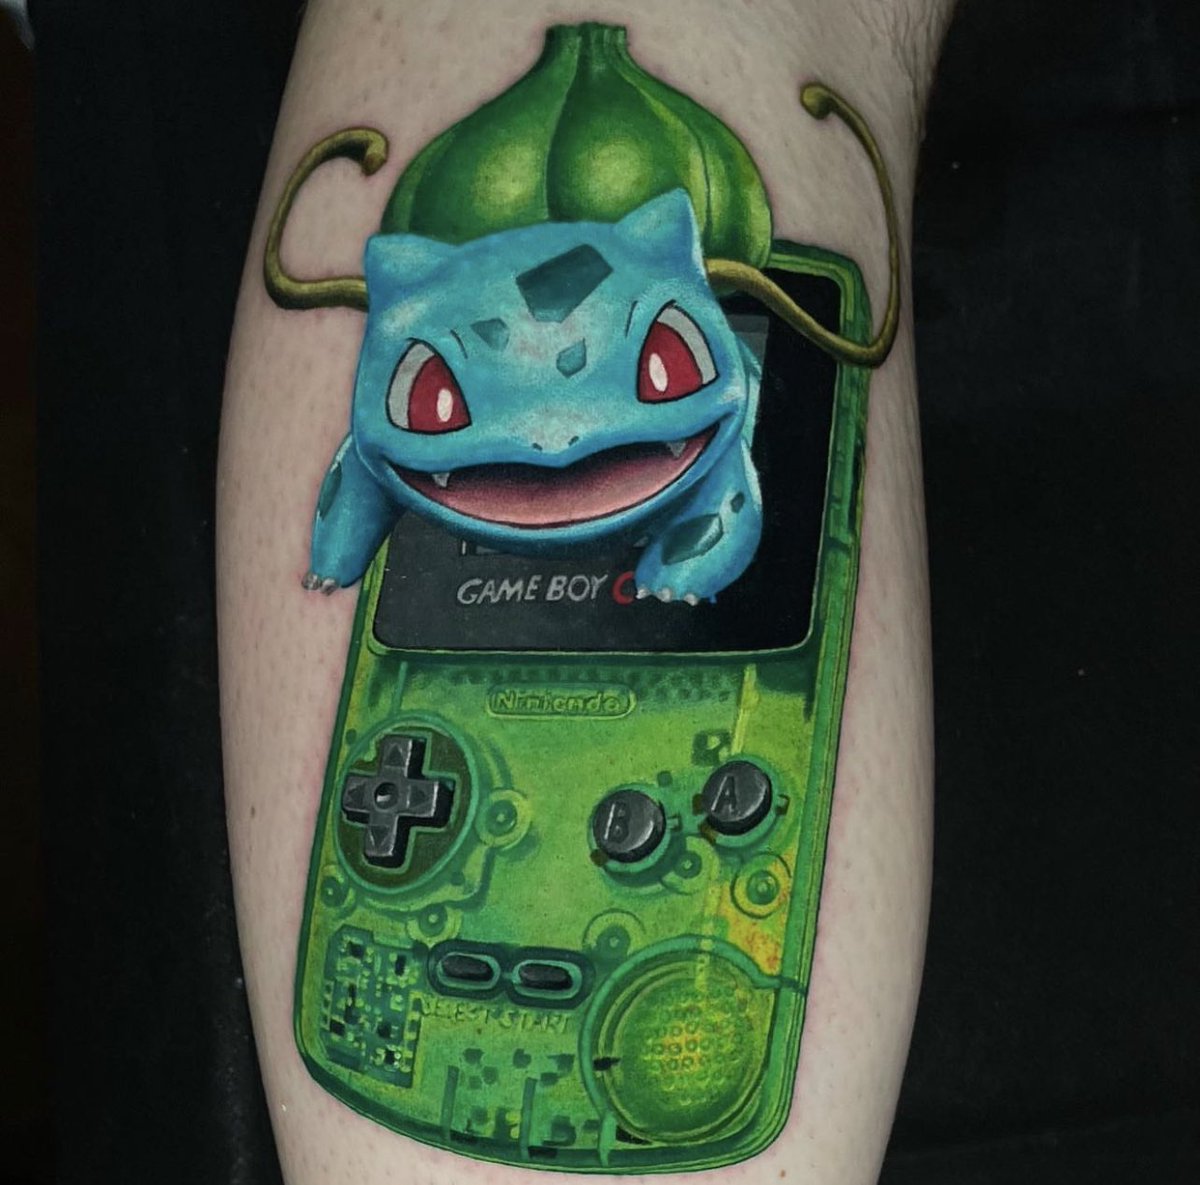 Who did you pick as your first starter? This is one of my favorite Pokémon tattoos I’ve gotten to do! #tattoo #pokemon